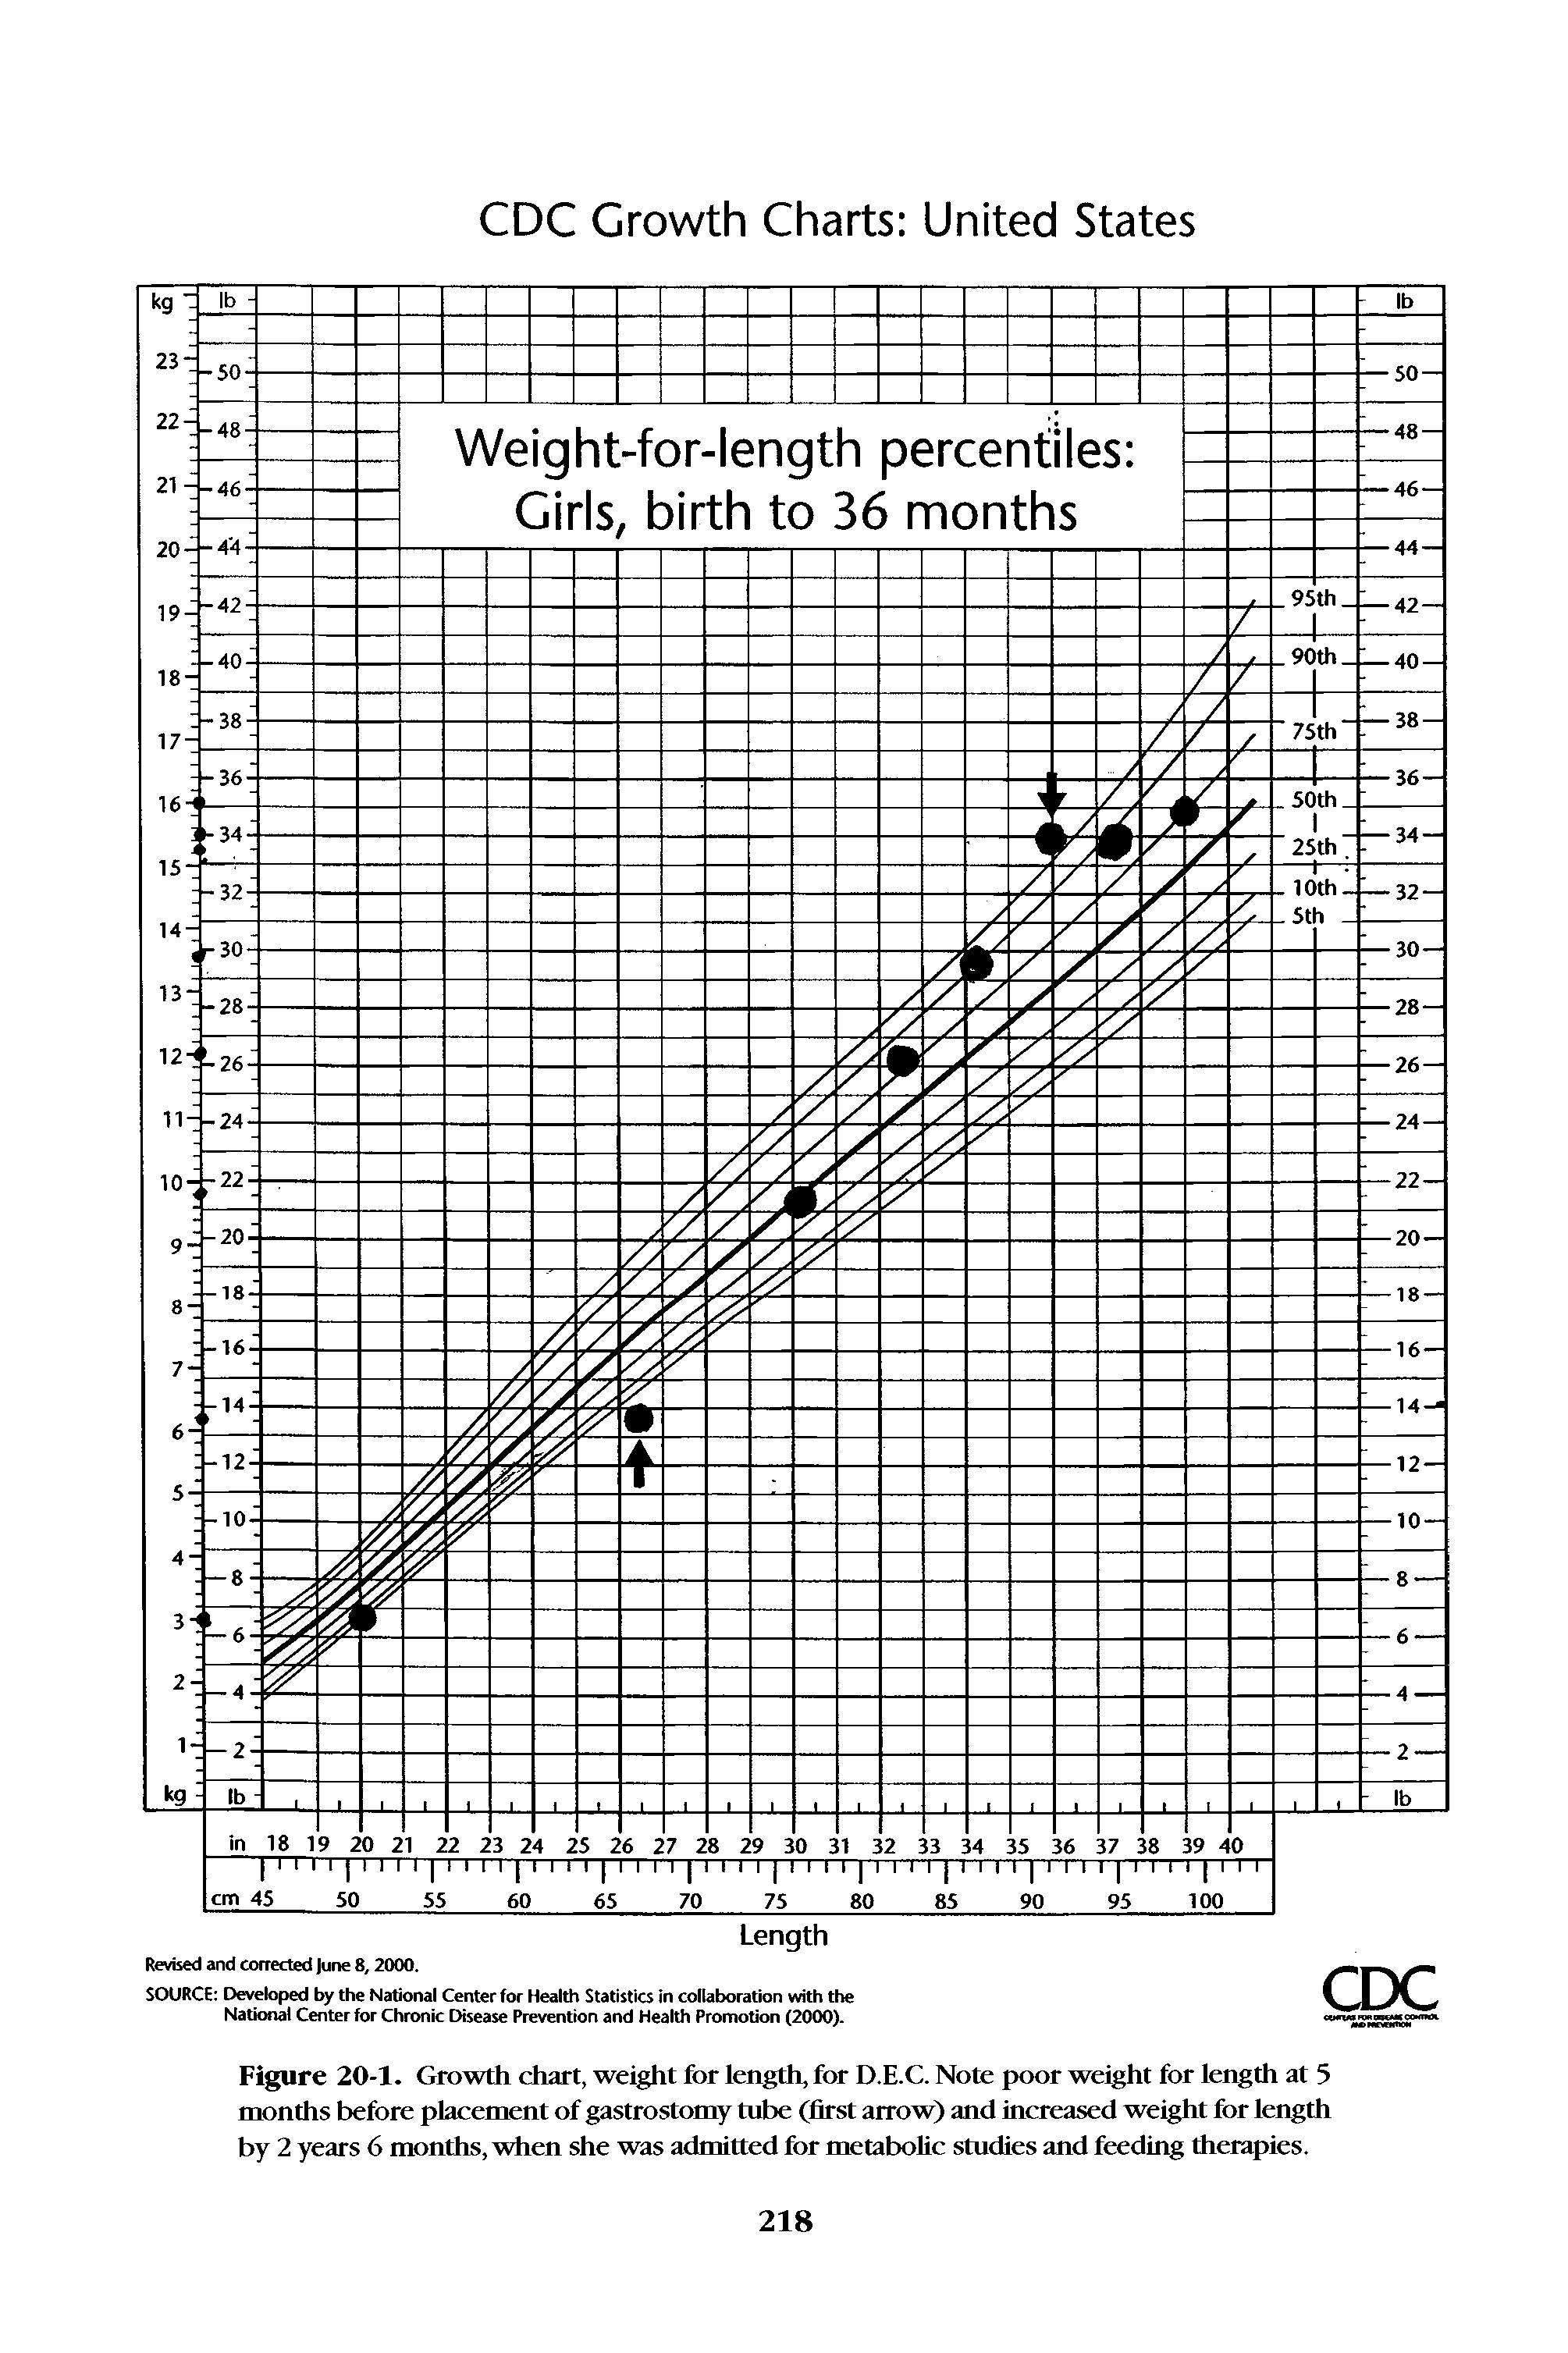 Figure 20-1. Growth chart, weight for length, for D.E.C. Note poor weight for length at 5 months before placement of gastrostomy tube (first arrow) and increased weight for length by 2 years 6 months, when she was admitted for metabolic studies and feeding therapies.